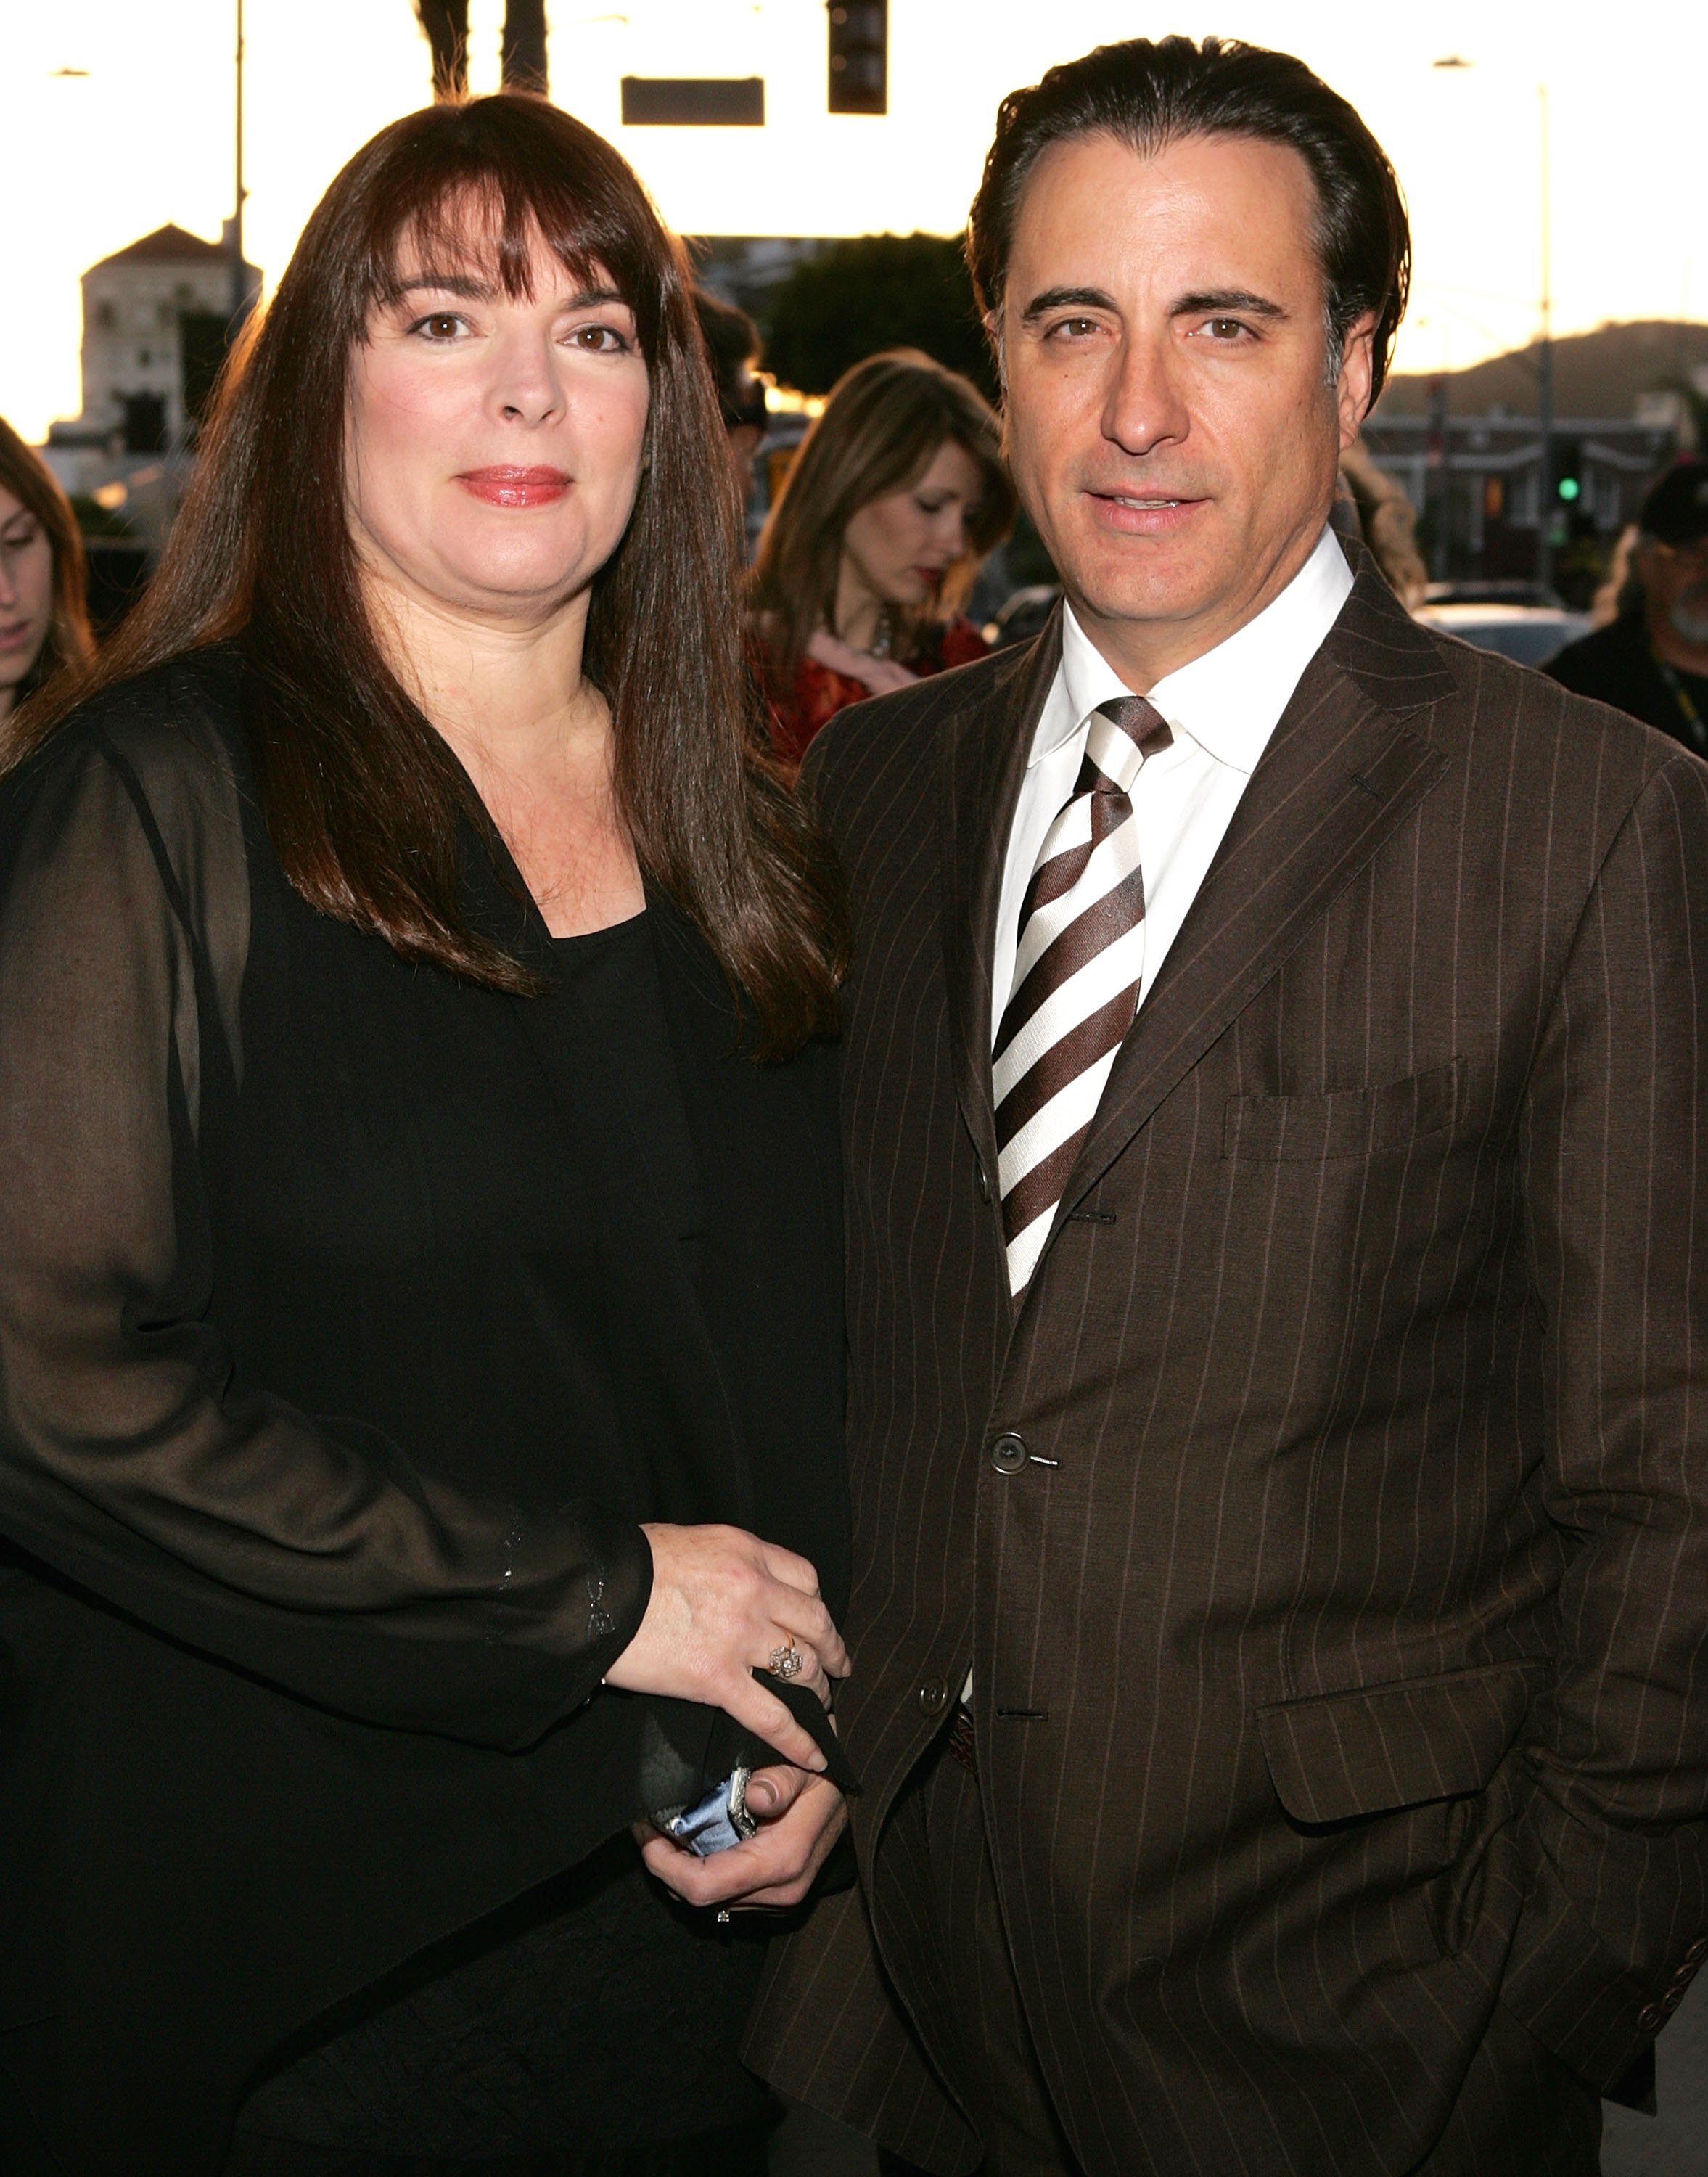 Andy Garcia and his wife Marivi Lorido Garcia attend the premiere of "The Lost City" at the Cinerama Dome April 17, 2006 in Hollywood, California | Source: Getty Images